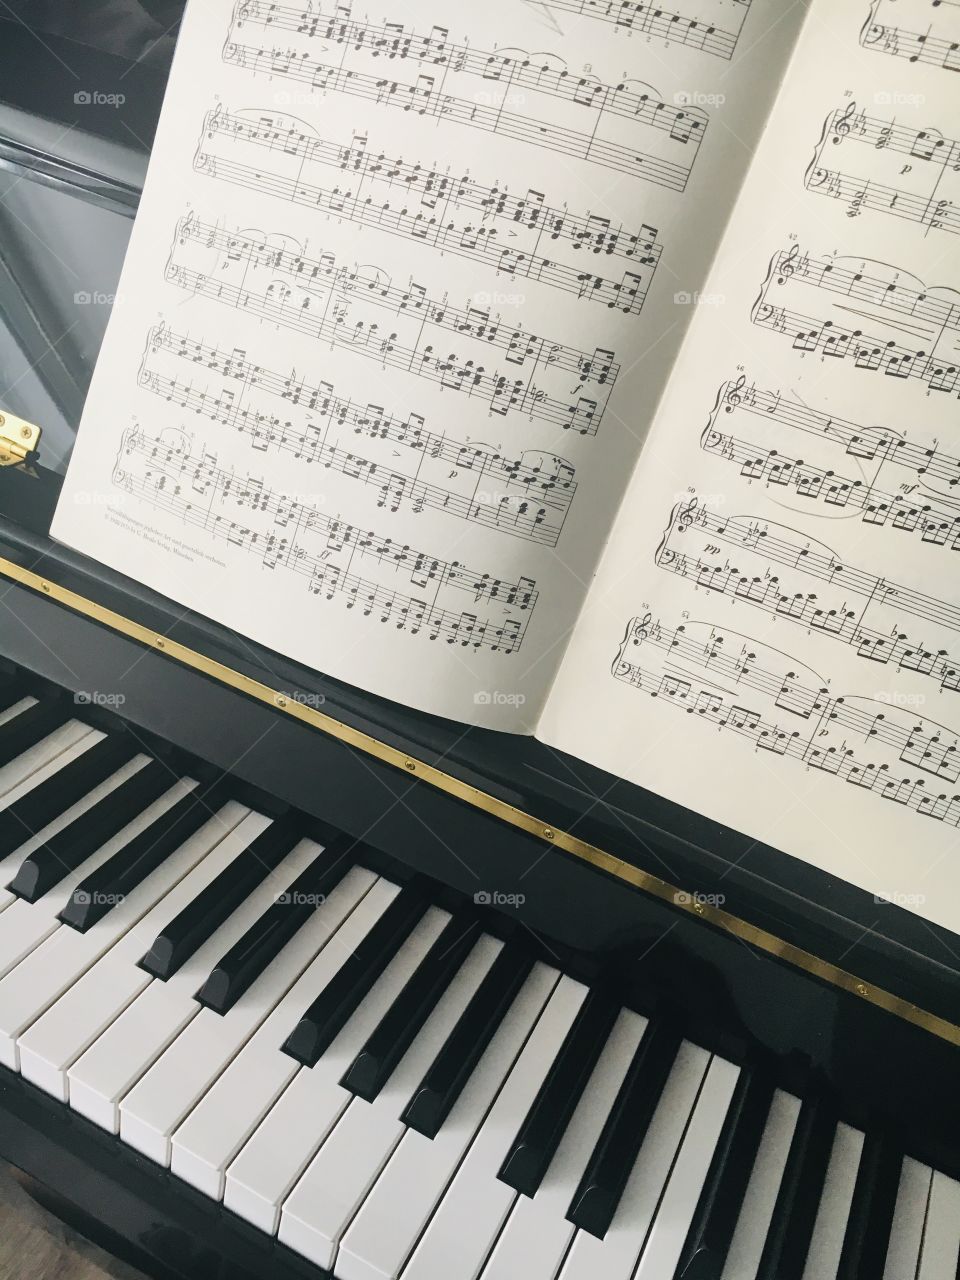 Just another random picture of my piano and of the piece Impomptu by Schubert that I'm trying to play